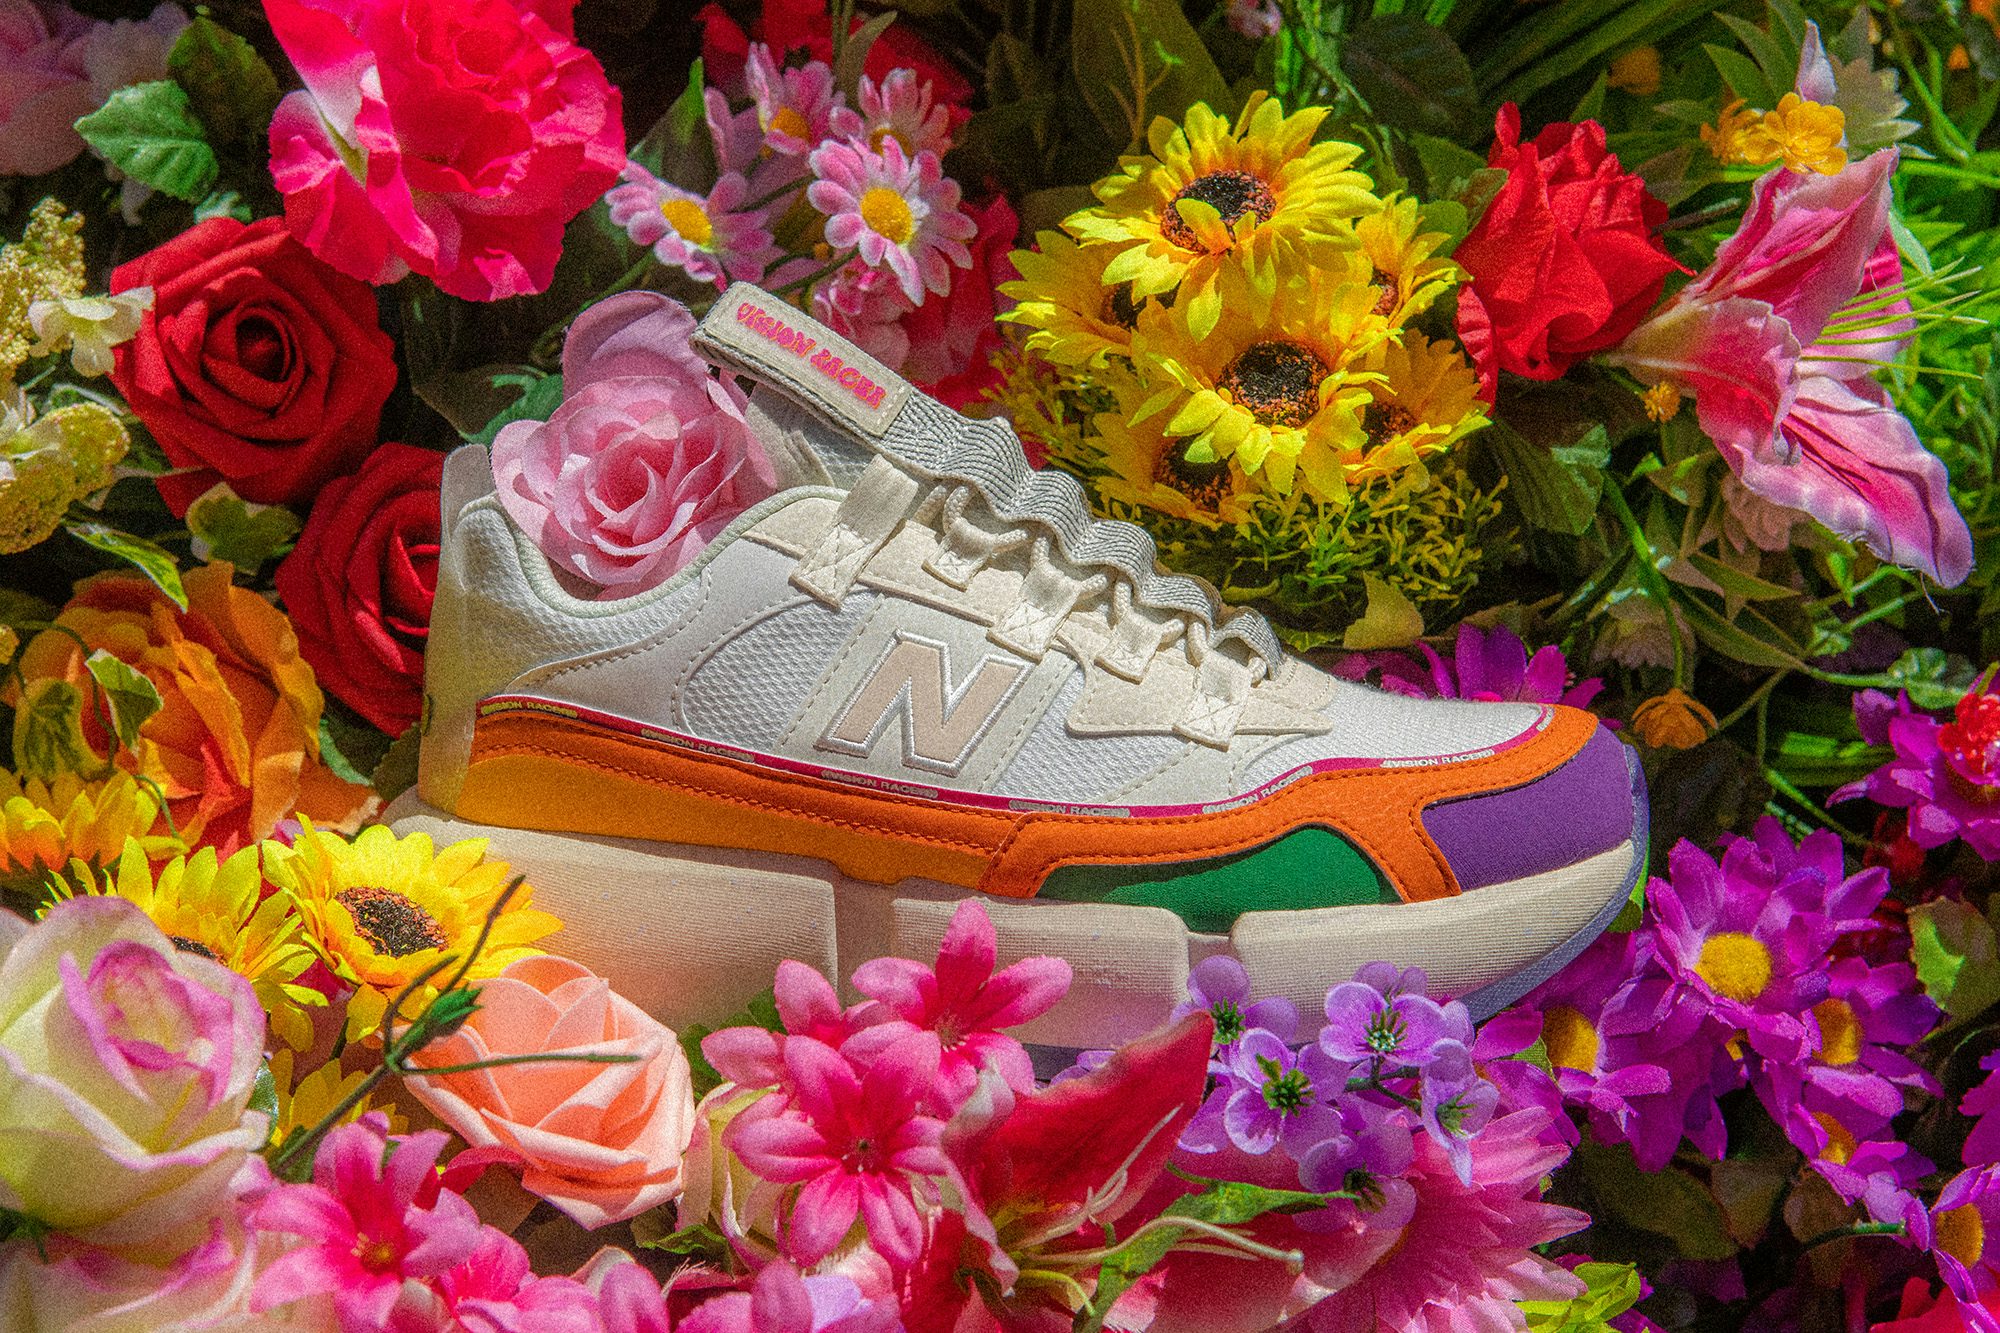 Photograph of the New Balance x Jaden Smith trainer surrounded by colourful flowers